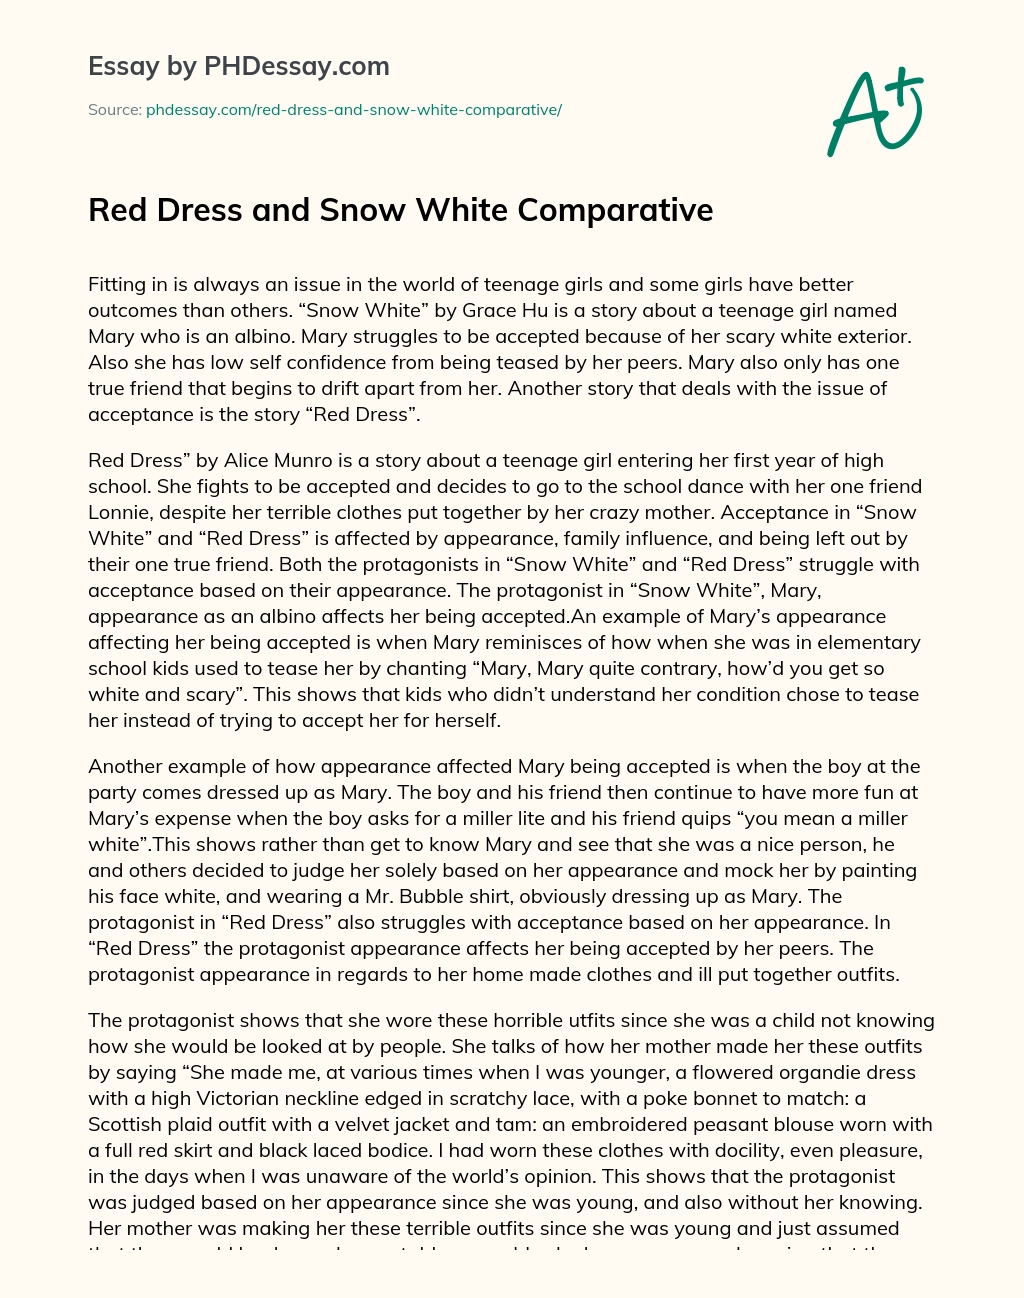 Red Dress and Snow White Comparative essay